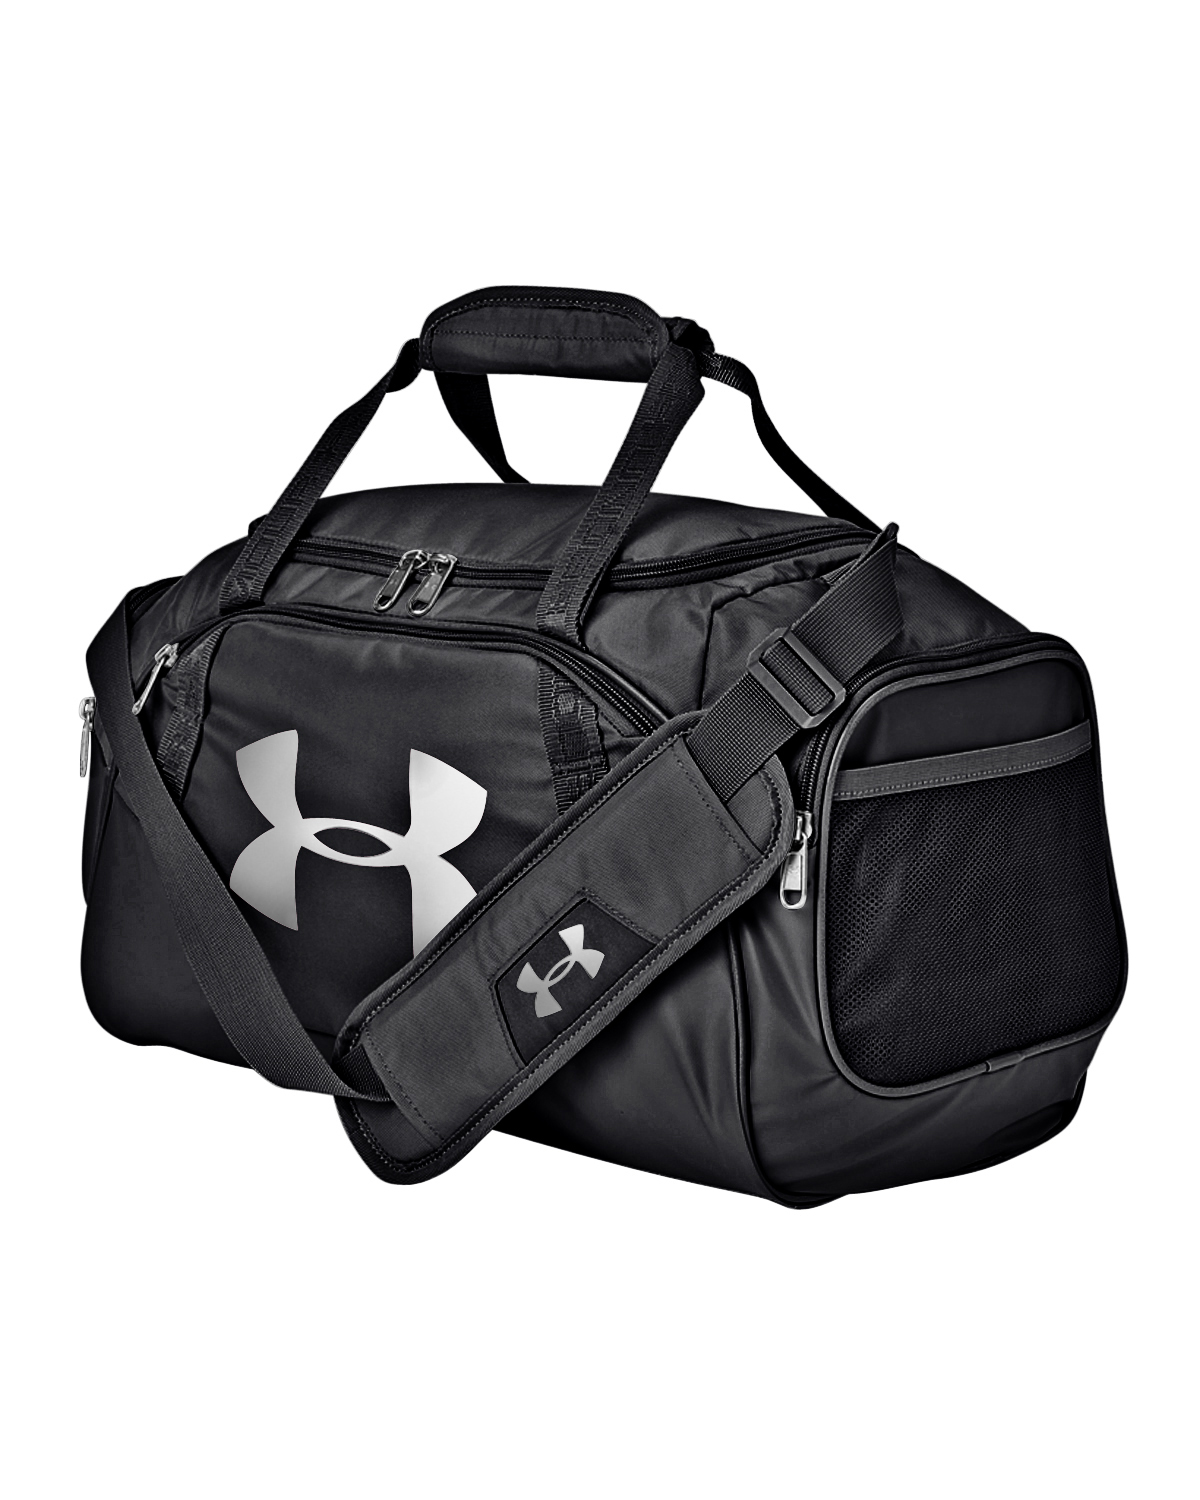 Under Armour 1301391 - UA Undeniable Duffle Extra-Small